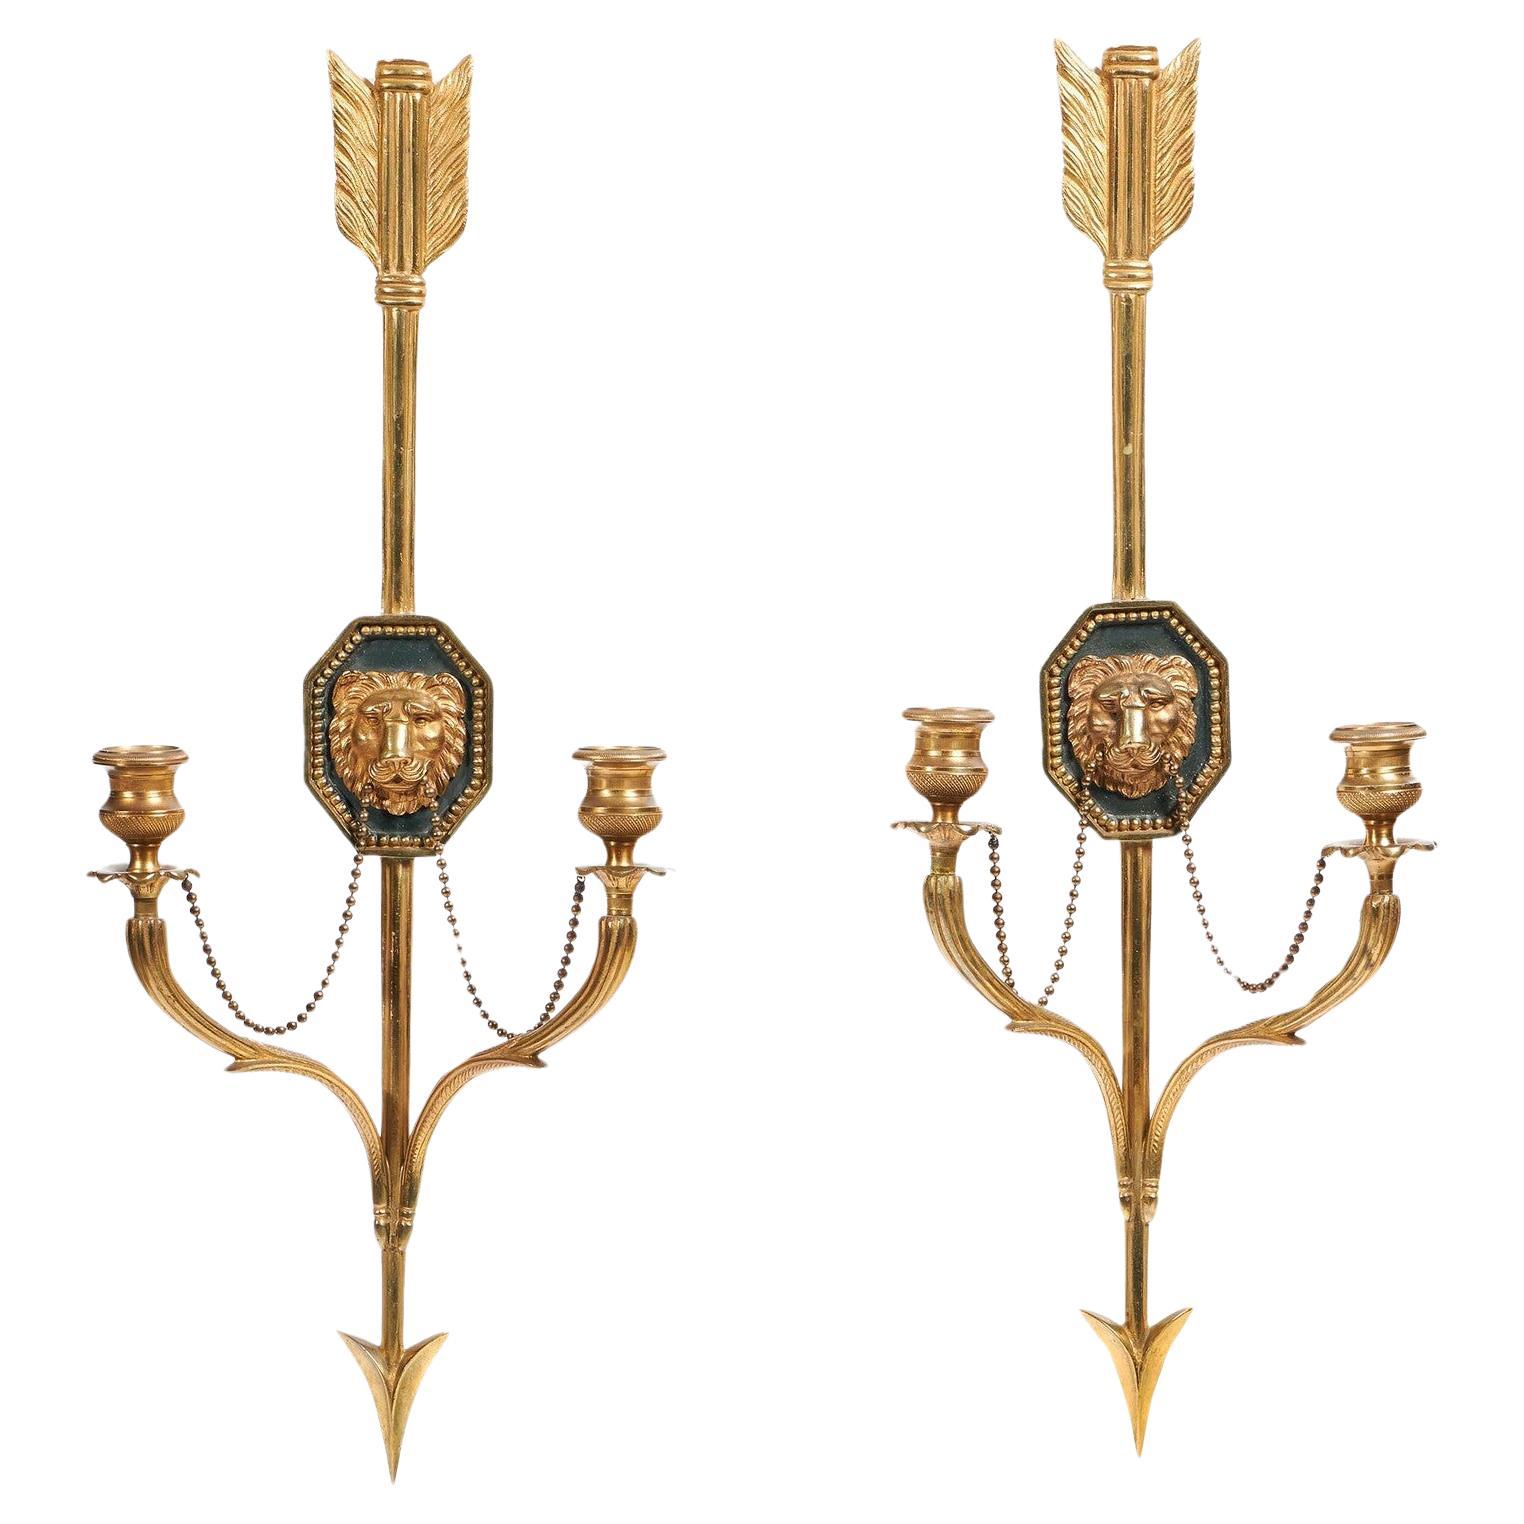 Fine Pair of Italian Ormolu Wall Lights or Appliques in the French Empire Style For Sale